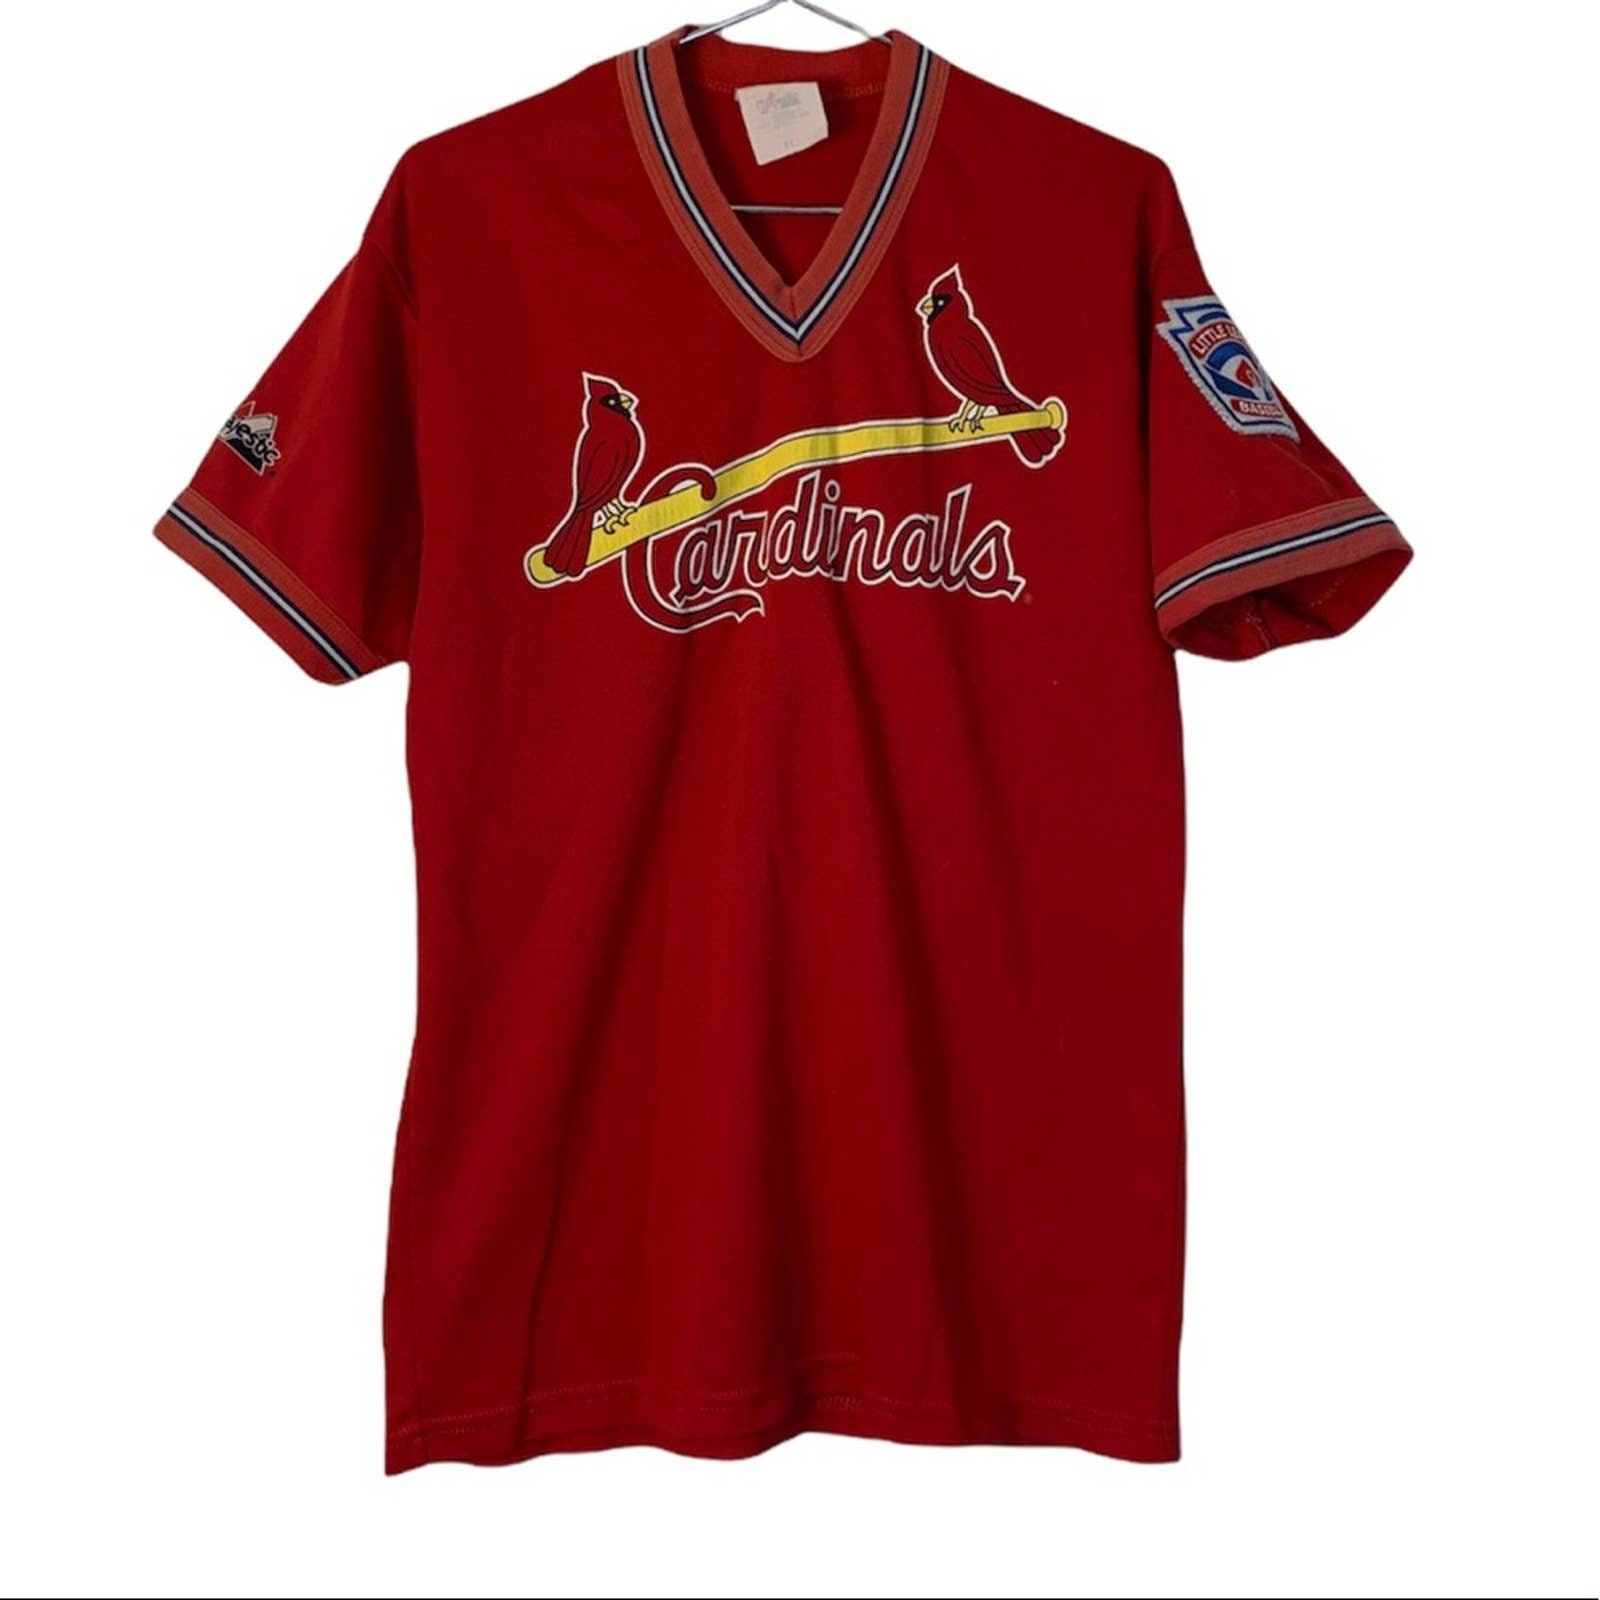 Personalized St. Louis Cardinals Baseball Jersey Onesie